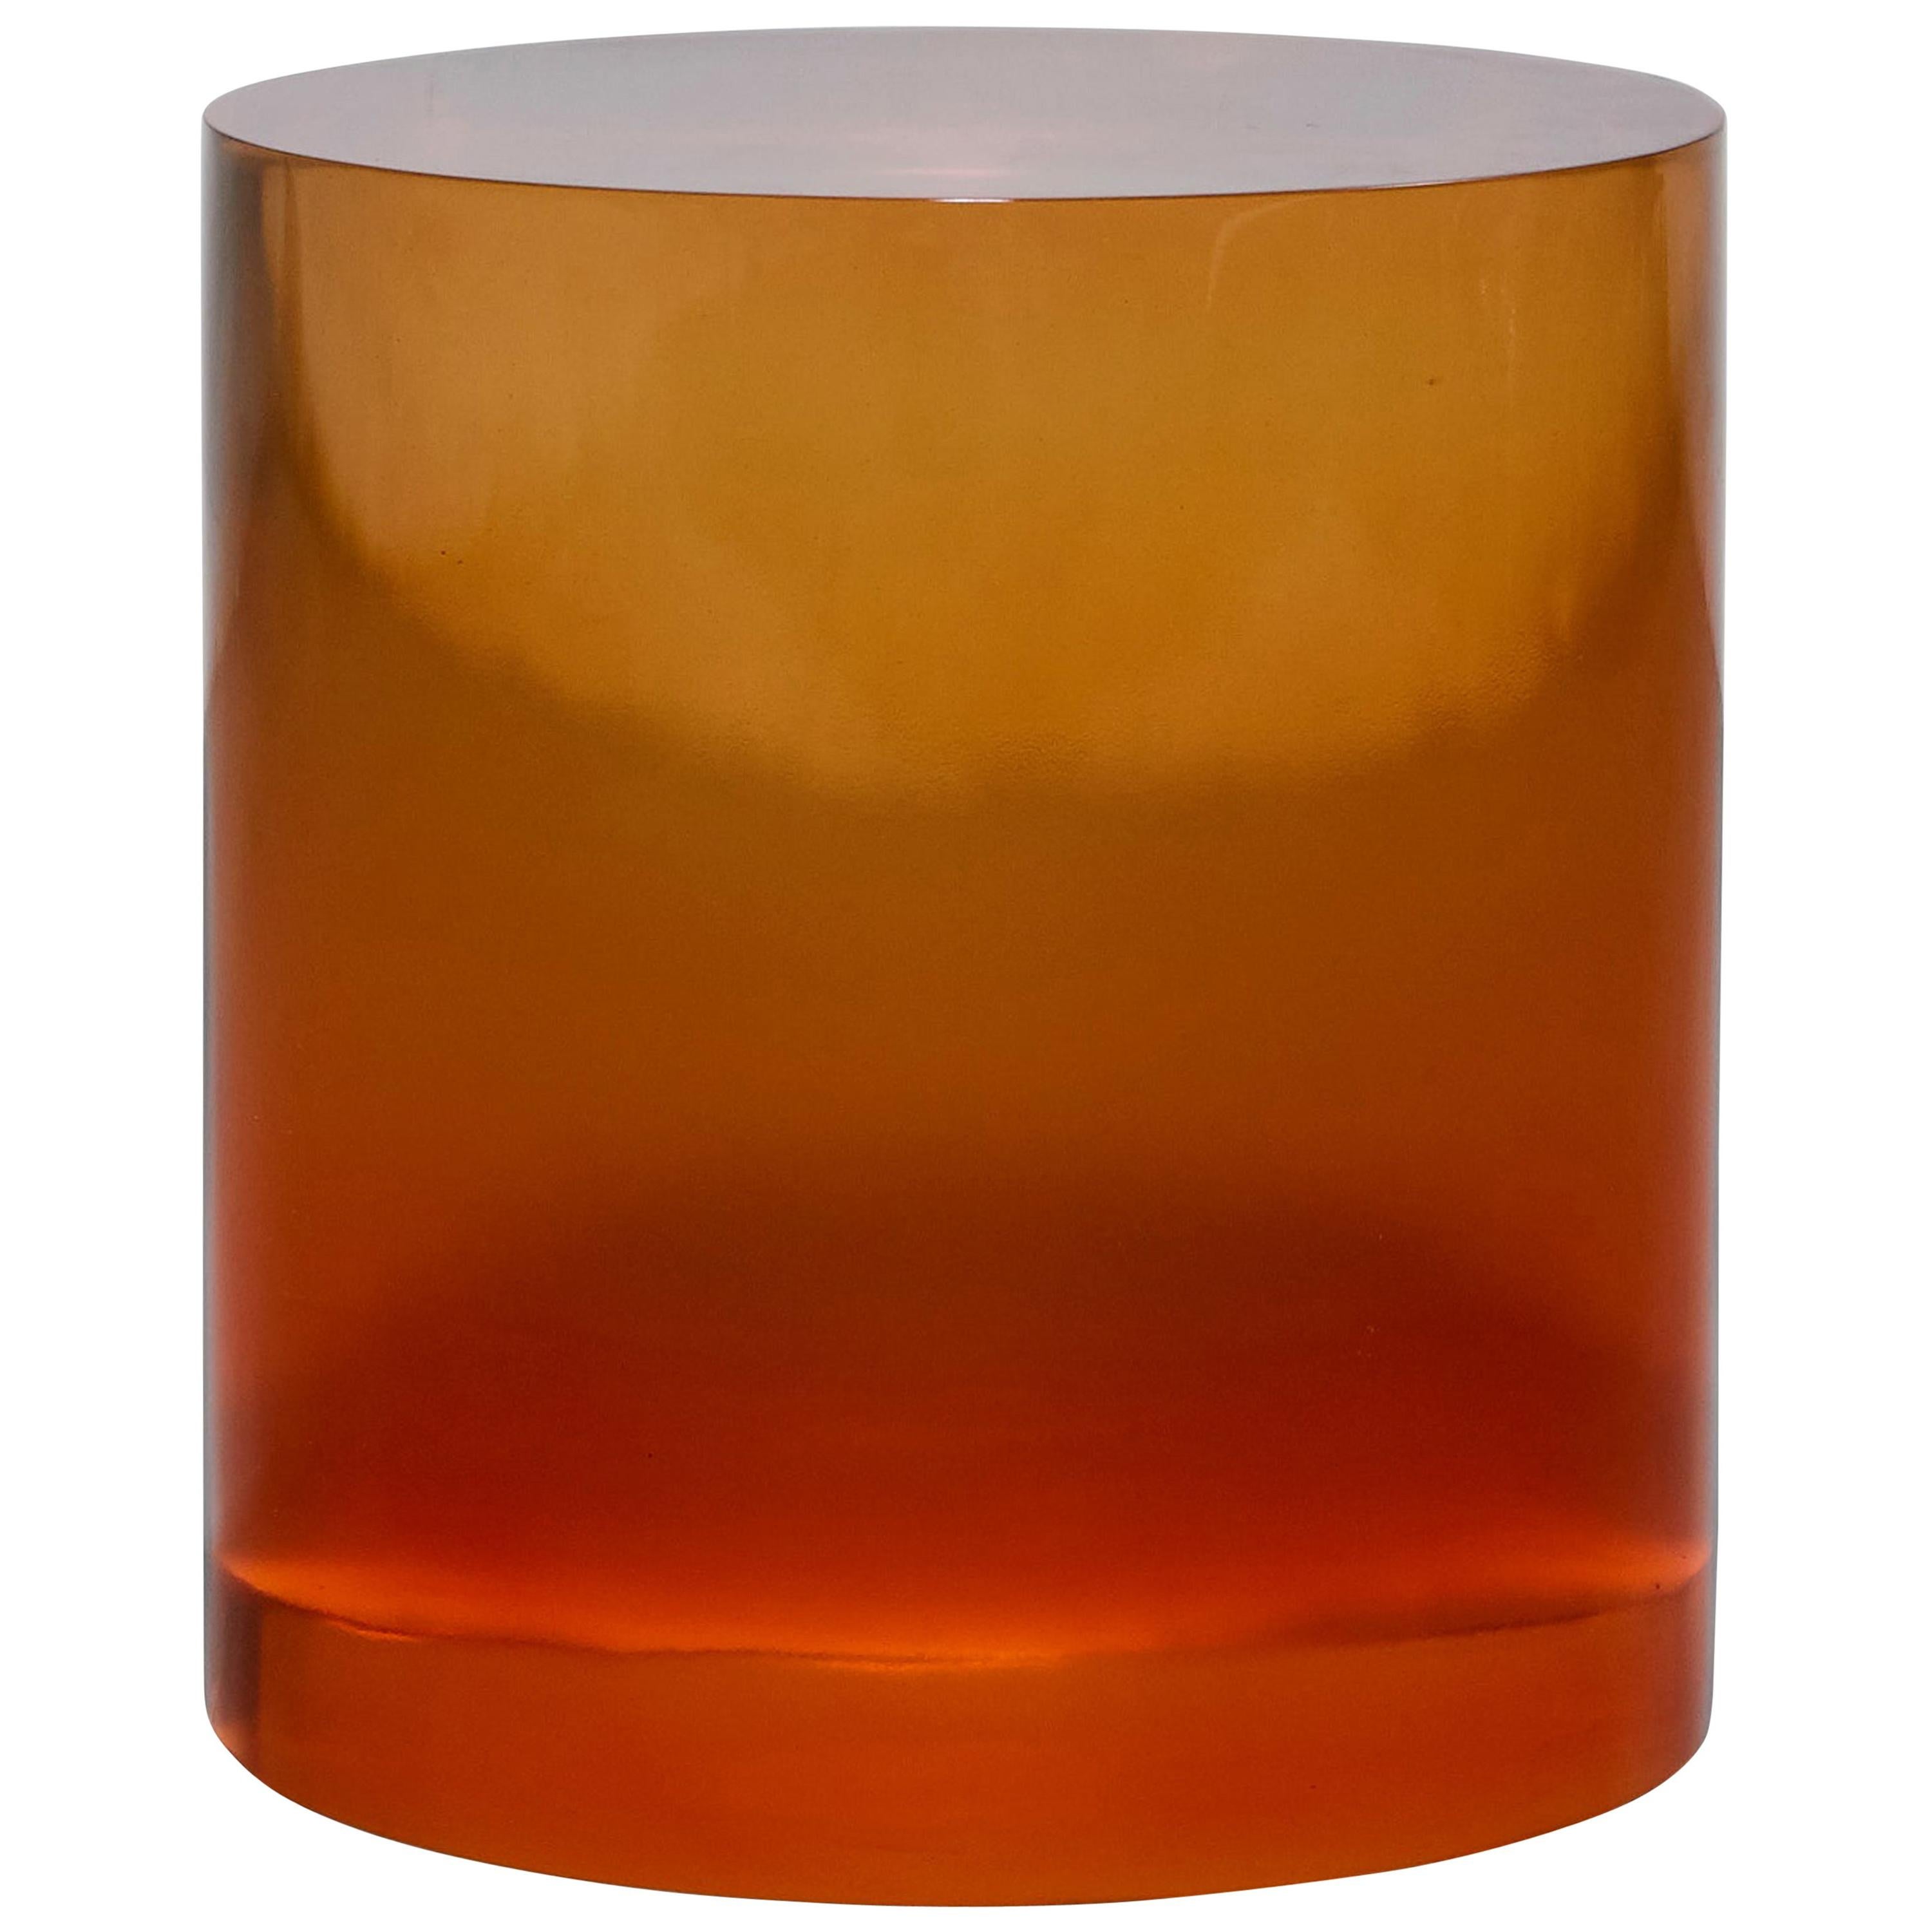 Seeing Through Your Illusions Sunset, Orange Translucent Resin Stool by Hua Wang For Sale